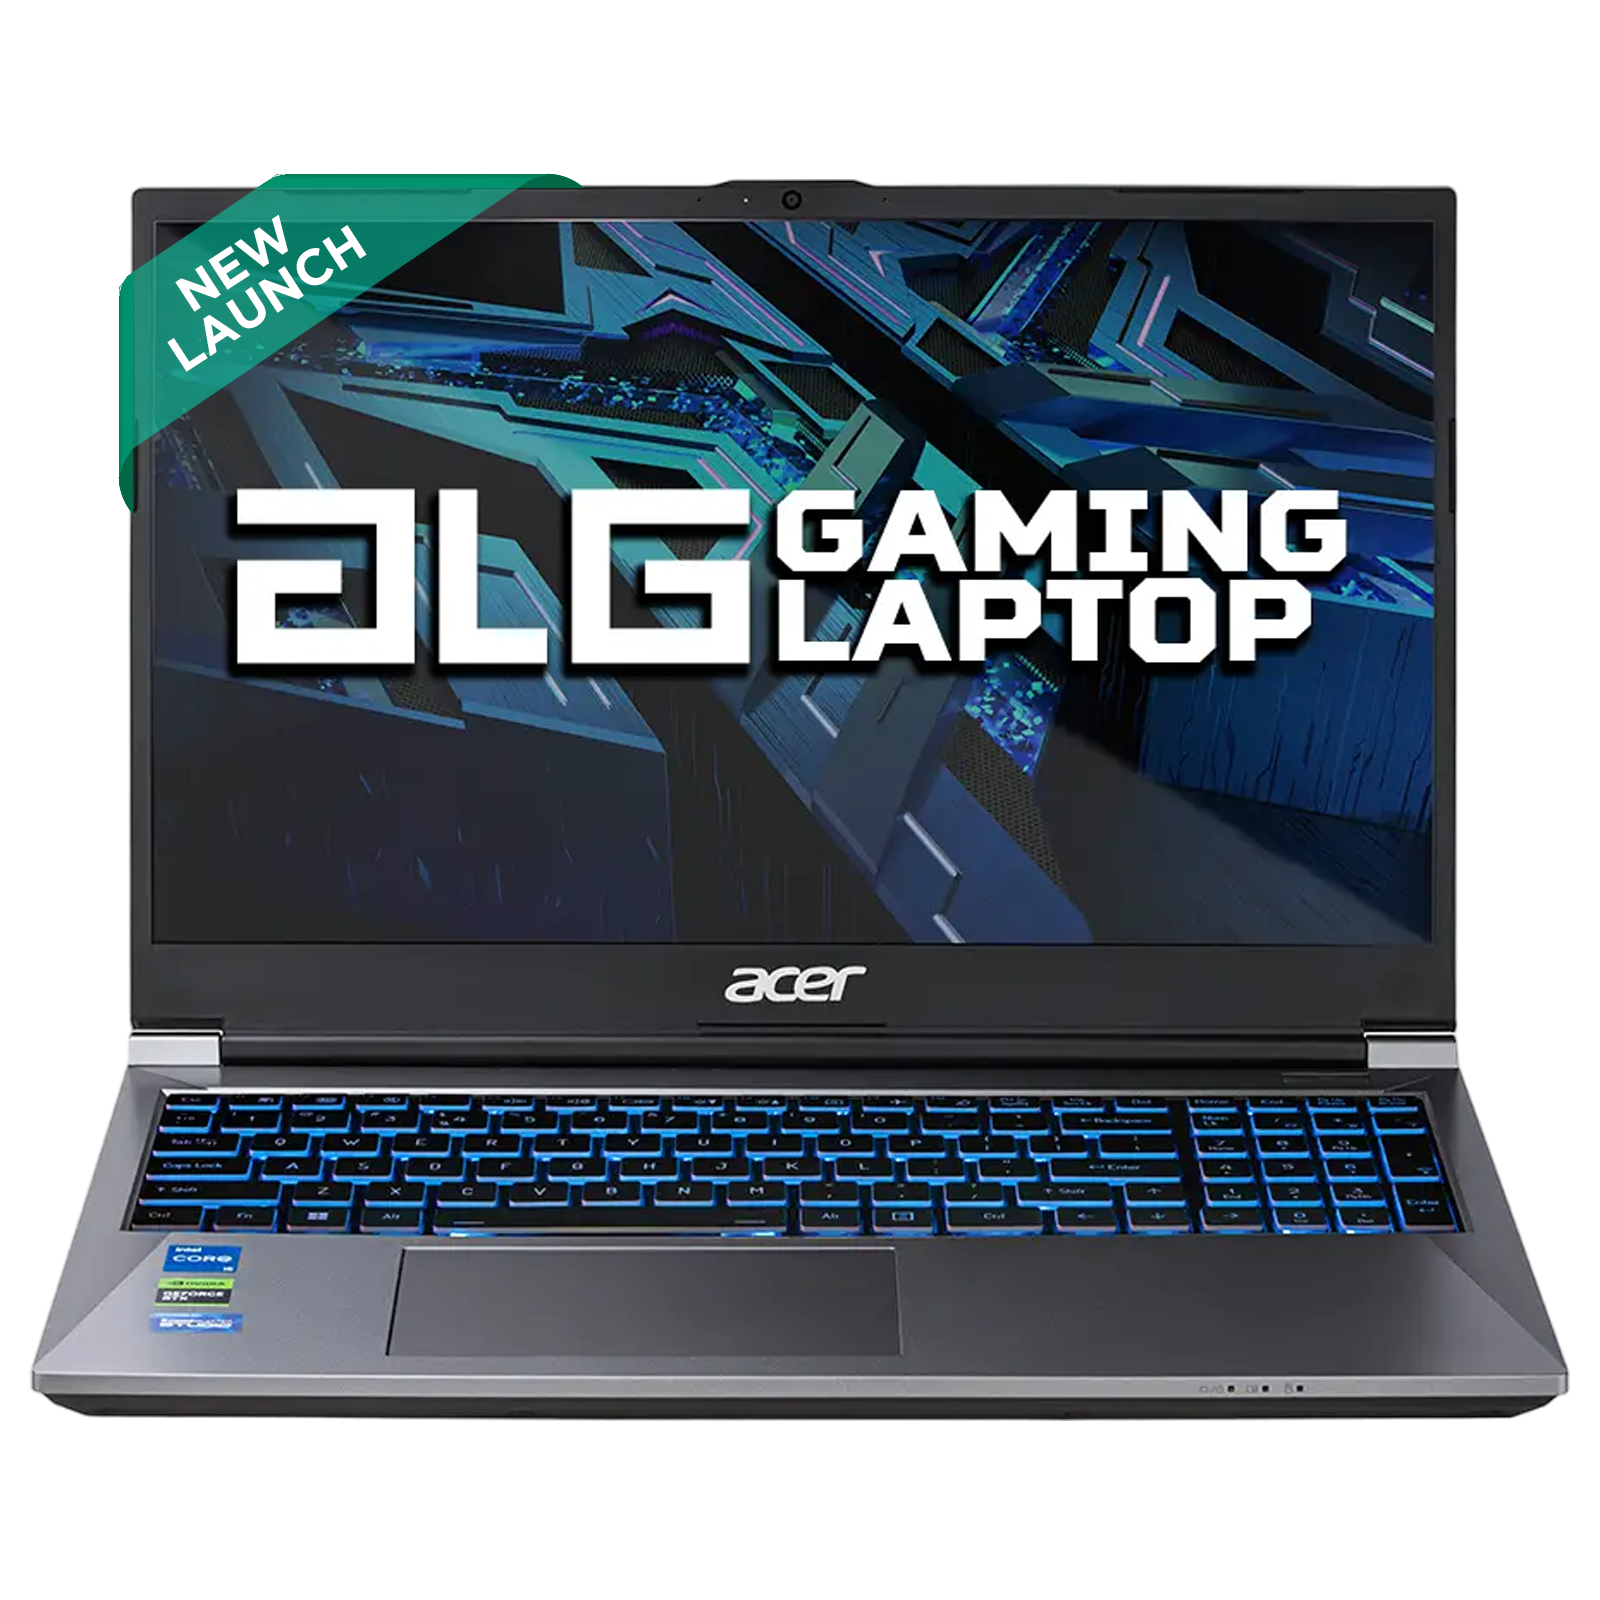 acer Aspire ALG Intel Core i5 12th Gen Gaming Laptop (16GB, 512GB SSD, Windows 11 Home, 6GB Graphics, 15.6 inch 144 Hz Full HD Display, NVIDIA GeForce RTX 3050, MS Office 2021, Steel Gray, 1.99 KG)